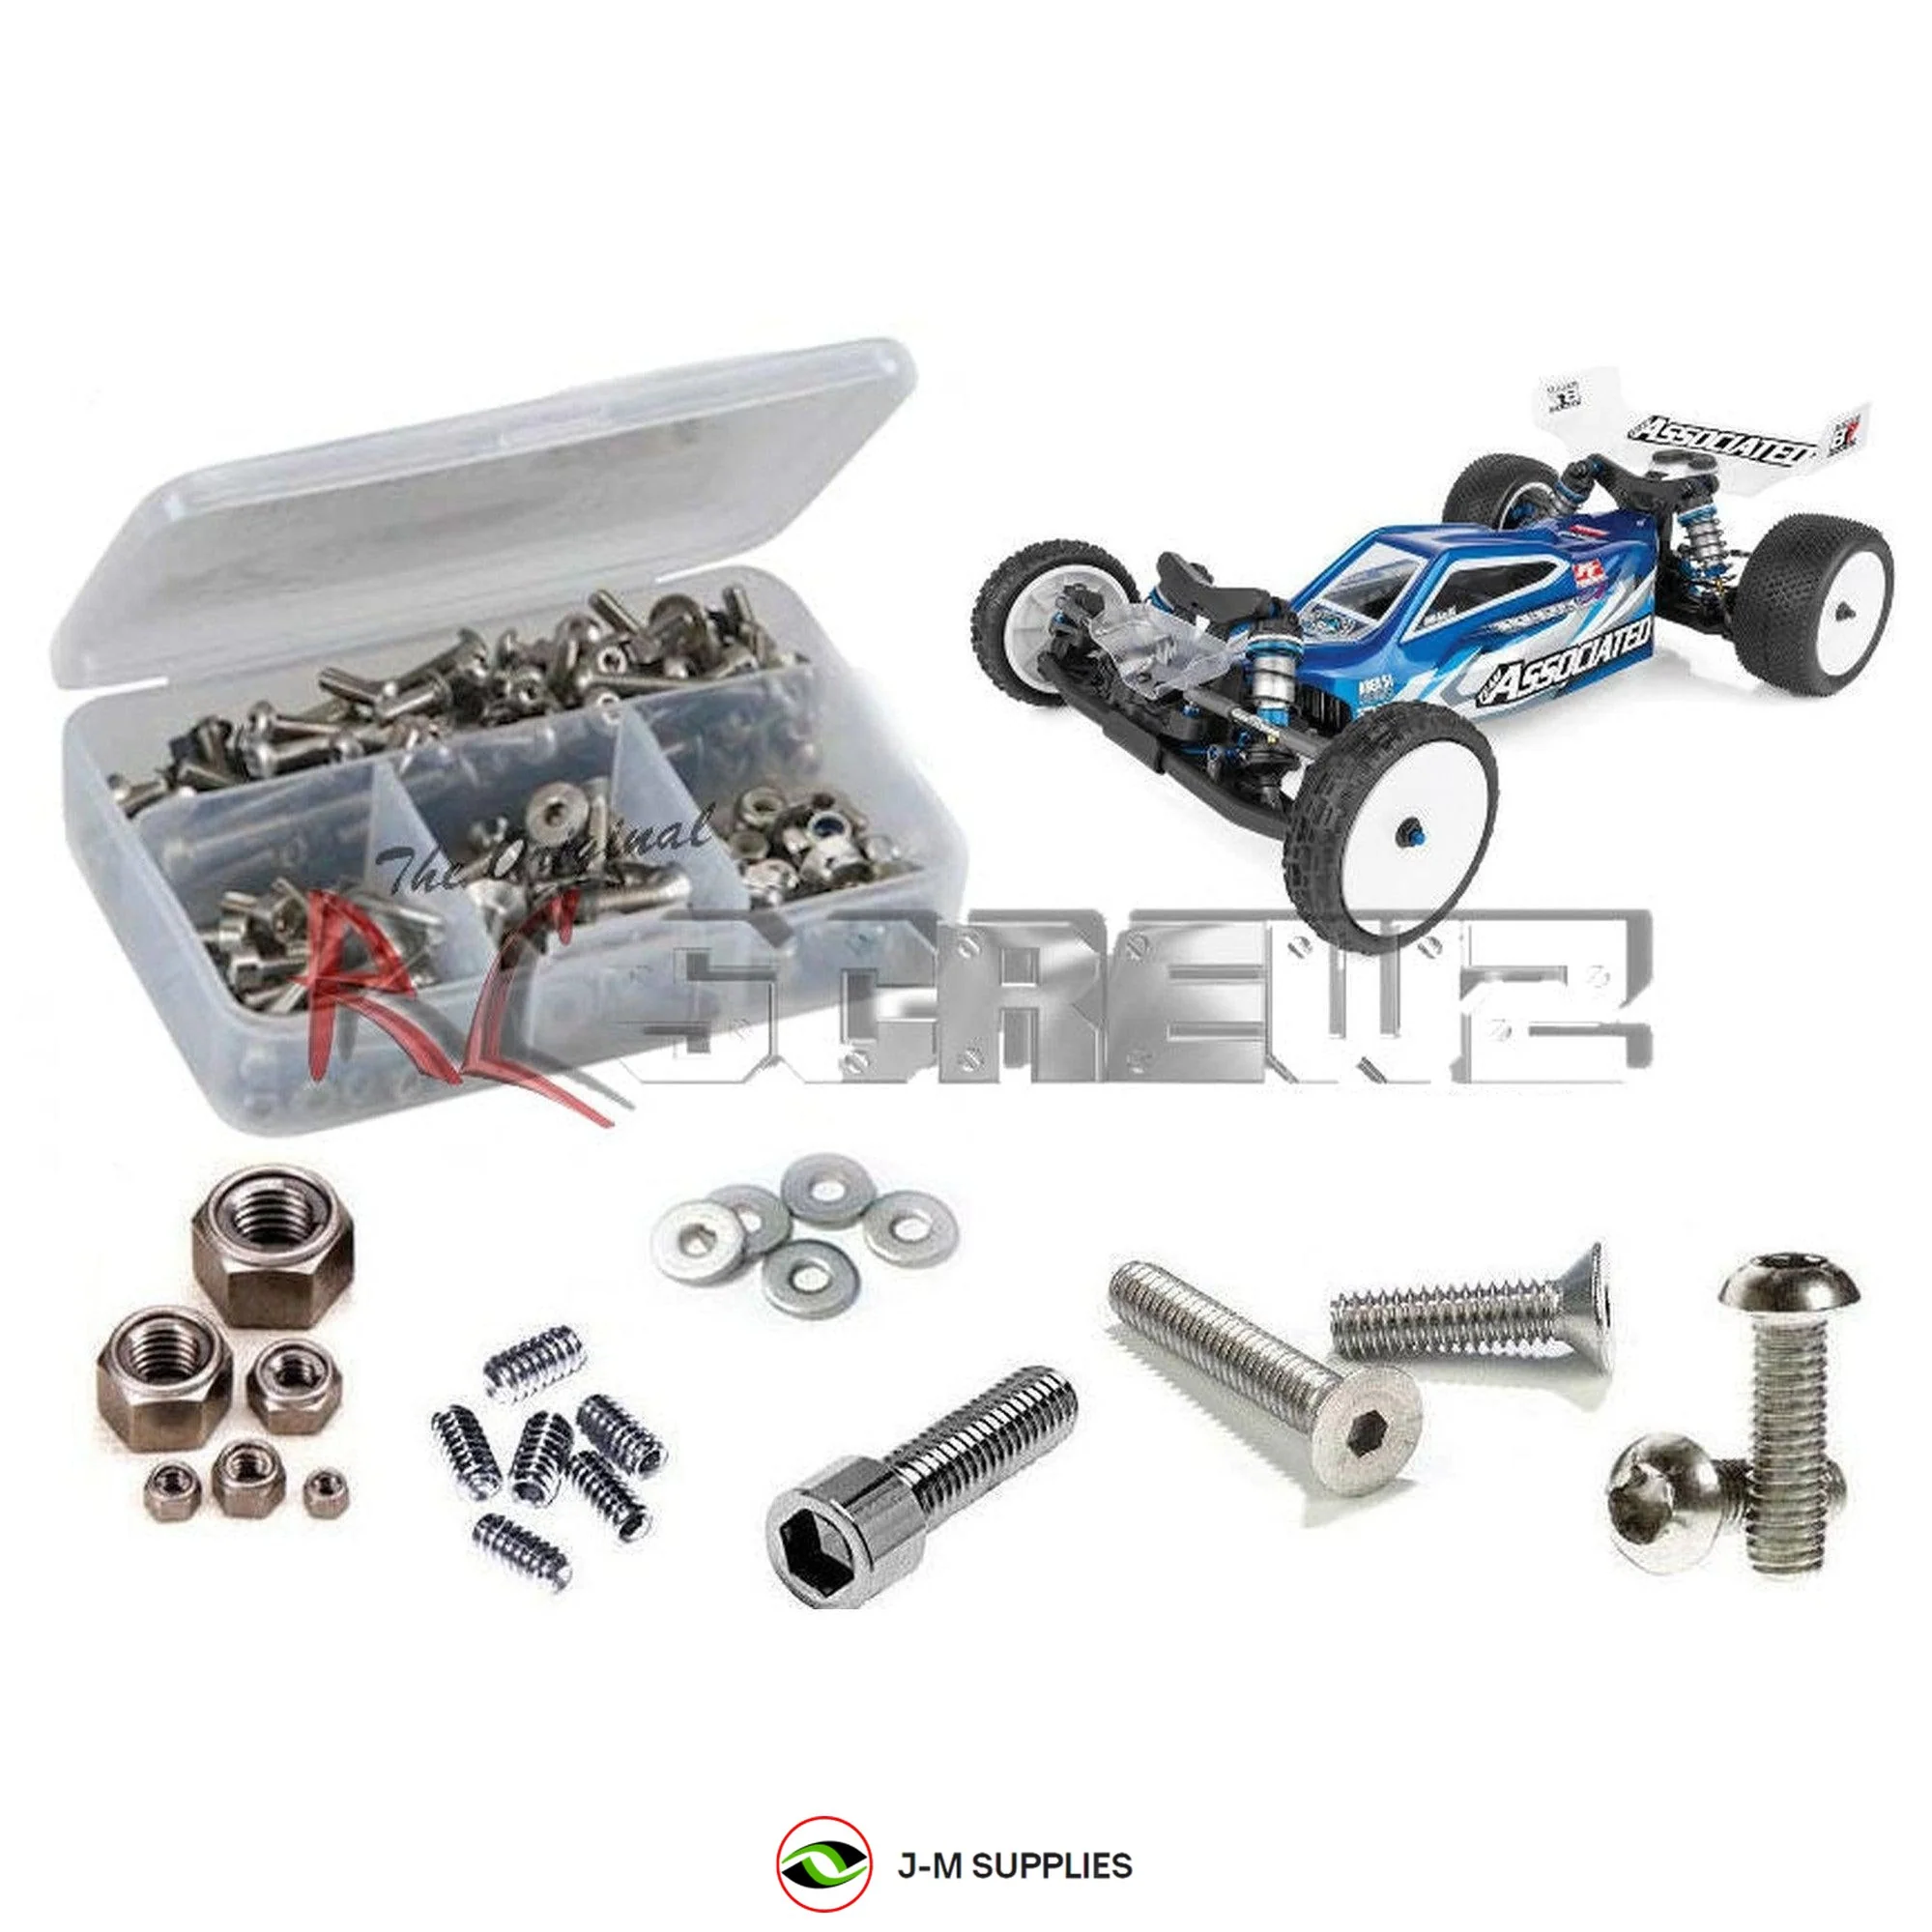 RCScrewZ Stainless Screw Kit asc138 for Associated RC10B7 / Team 1/10th (#90041) - Picture 1 of 12